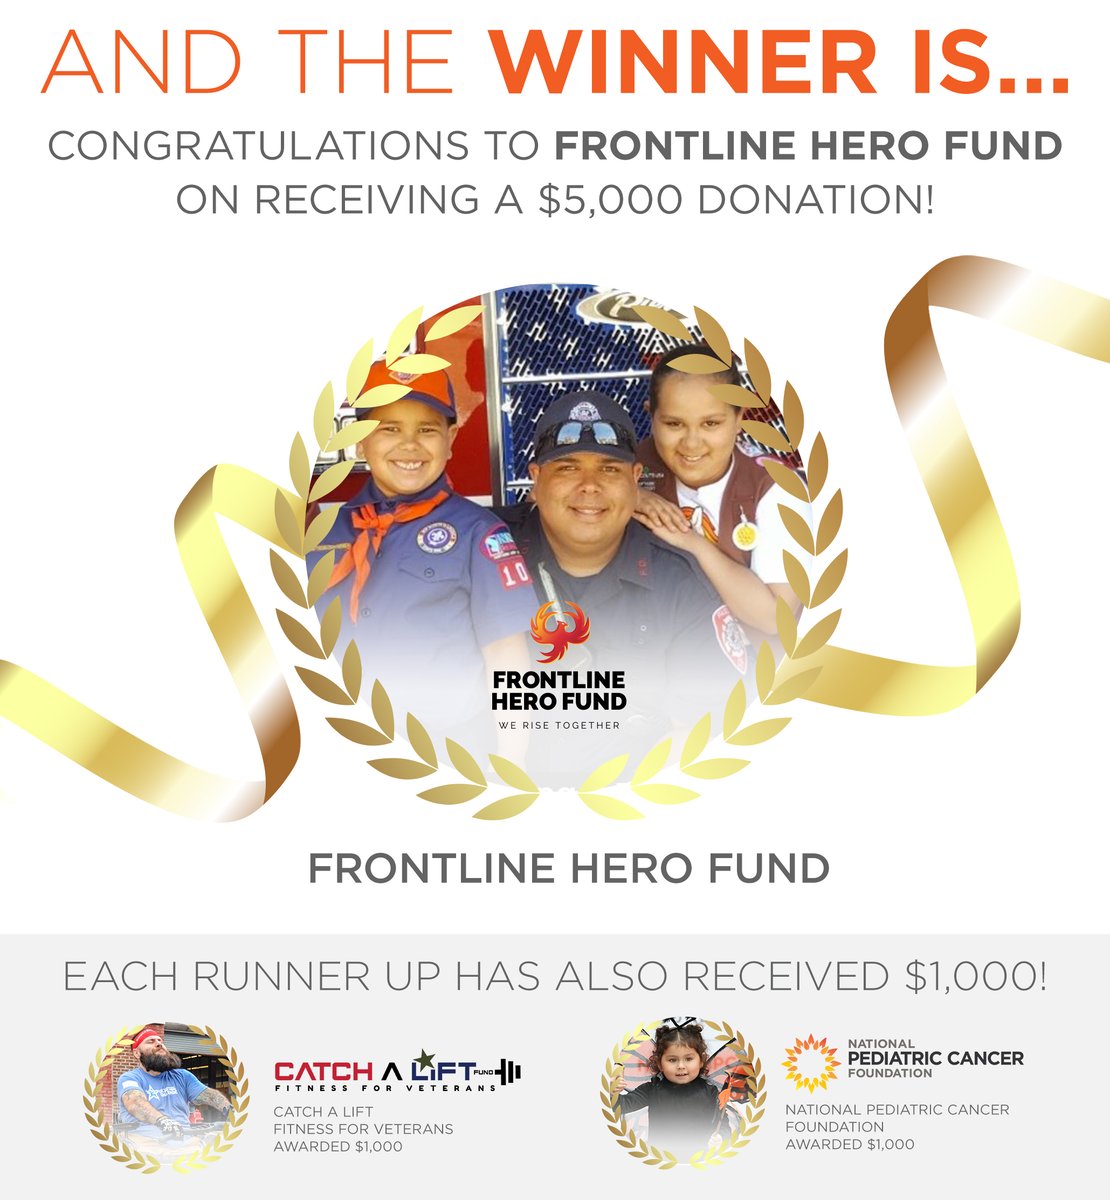 The people have spoken! 🥳 #FrontlineHeroFund is the #winner of this year’s #charitygiveaway2020, receiving a $5,000 donation 💵 Thank you to @PediatricCancer & @CatchALiftFund for participating—each will receive $1,000 as well! We received a total of 9609 votes—INCREDIBLE!